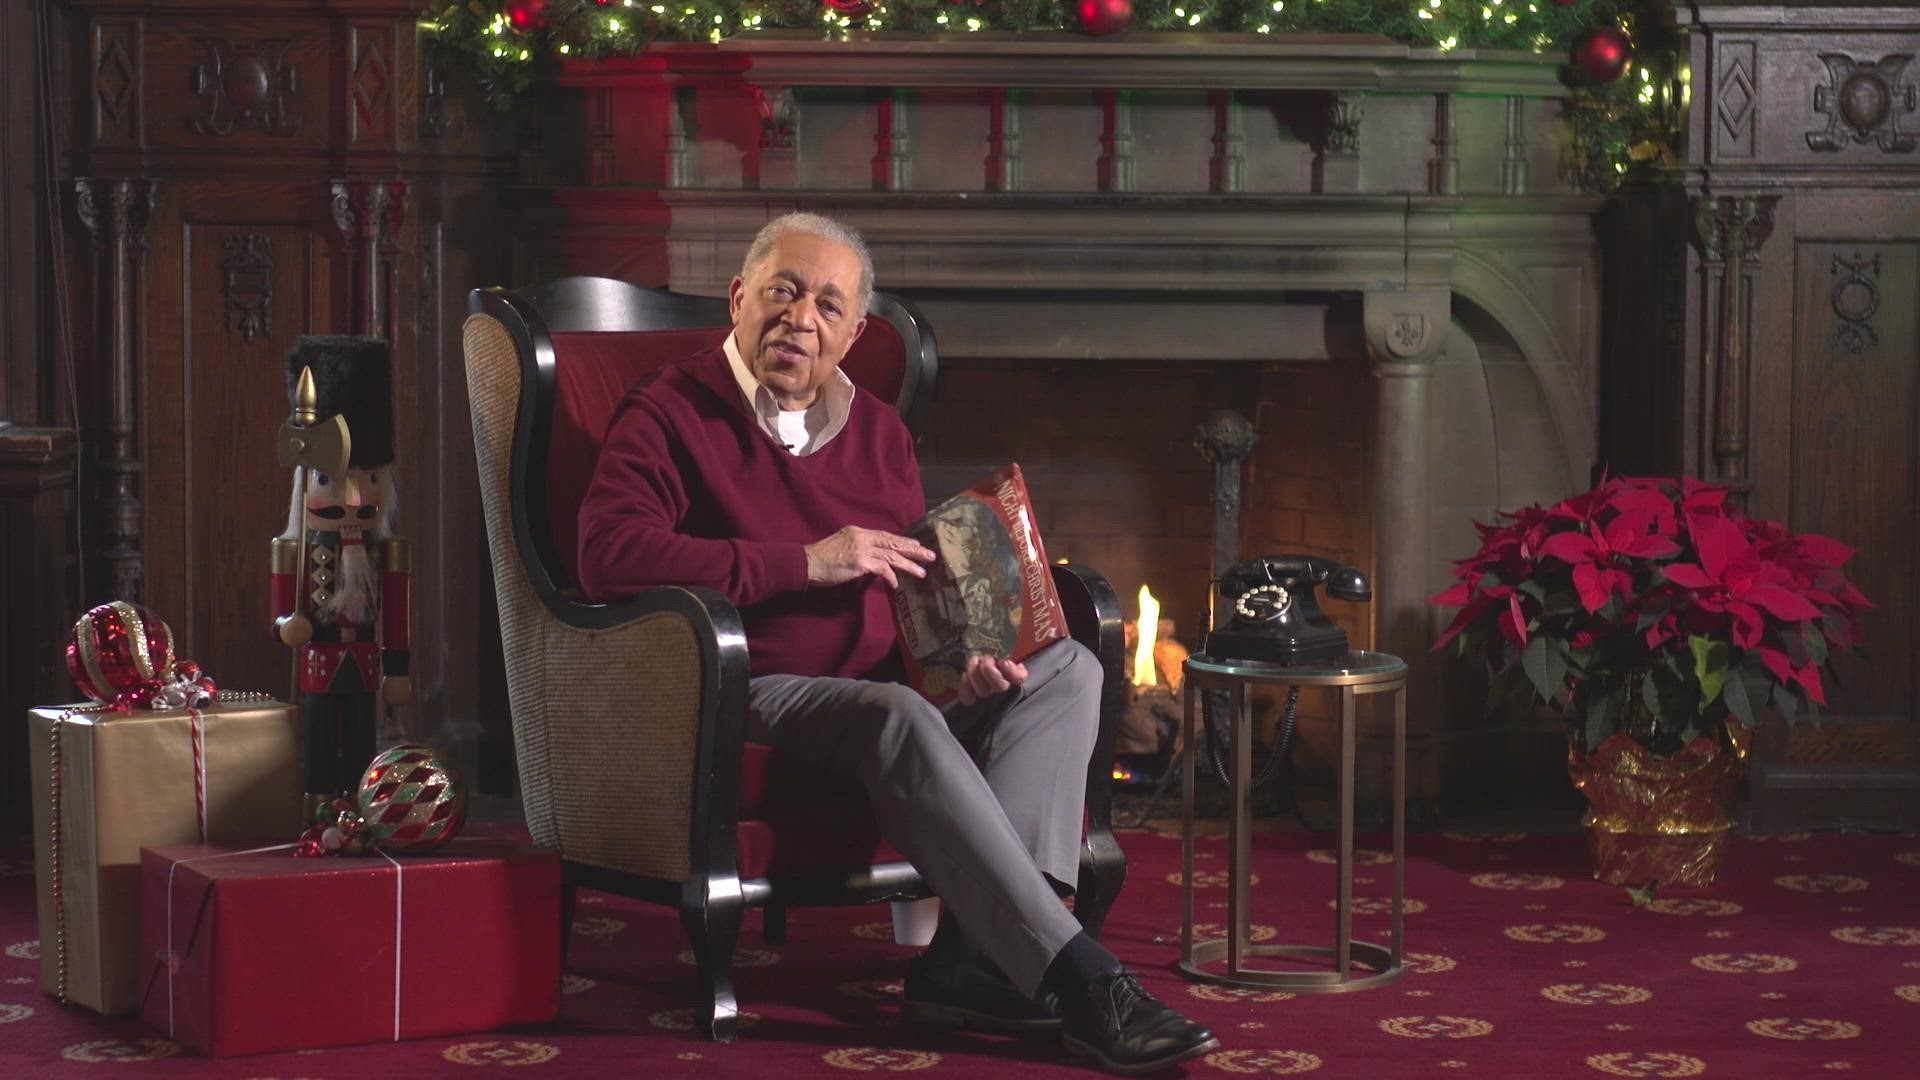 Christmas time is officially here. In the spirit of the season, 3News' Leon Bibb is here with a rendition of "'Twas the Night Before Christmas."